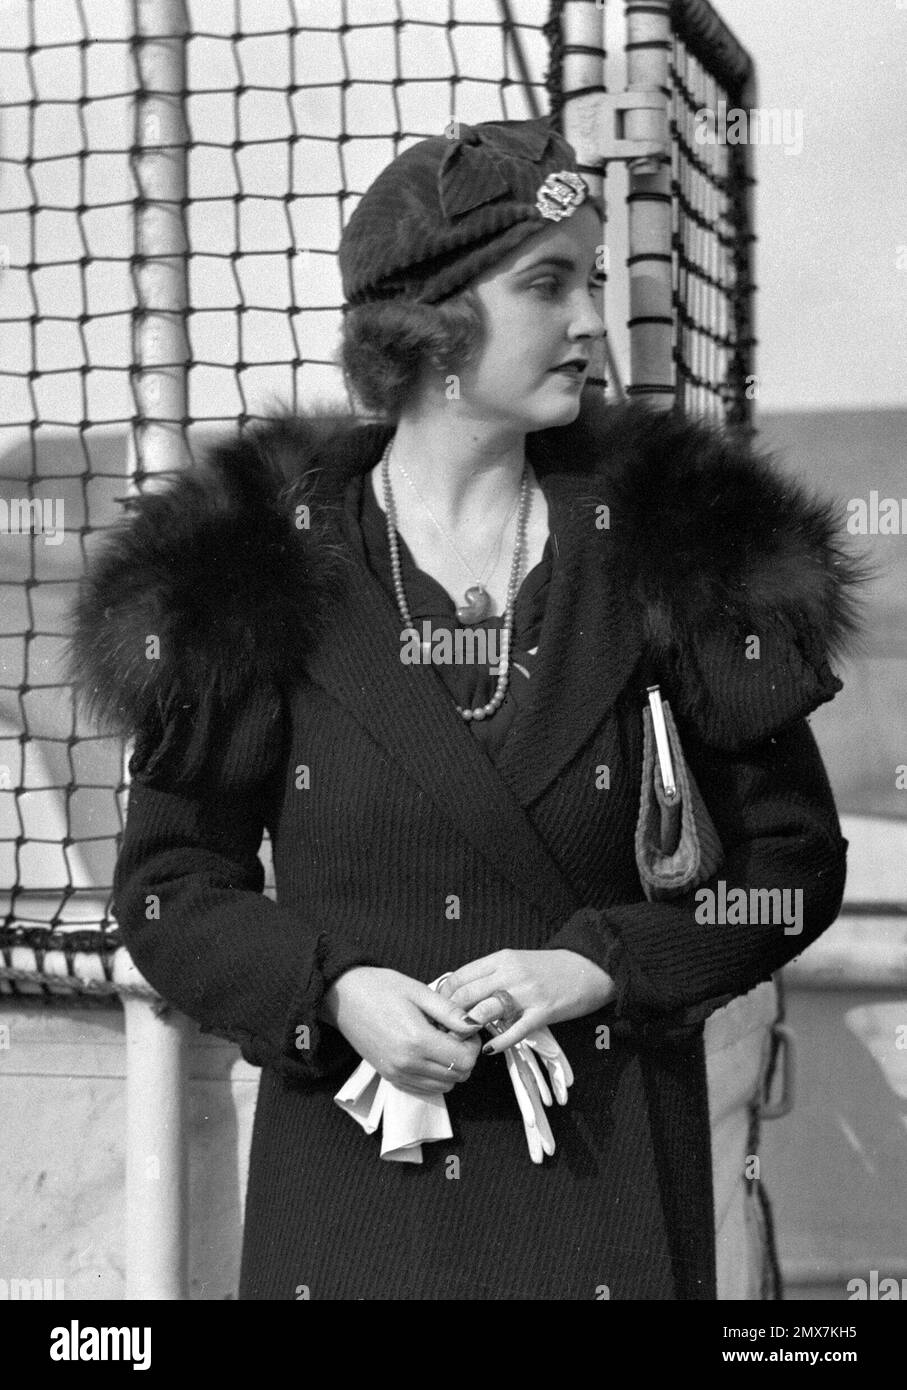 Barbara Hutton. Portait of the American heiress, Barbara Woolworth Hutton (1912-1979), on board a ship in the 1930s Stock Photo